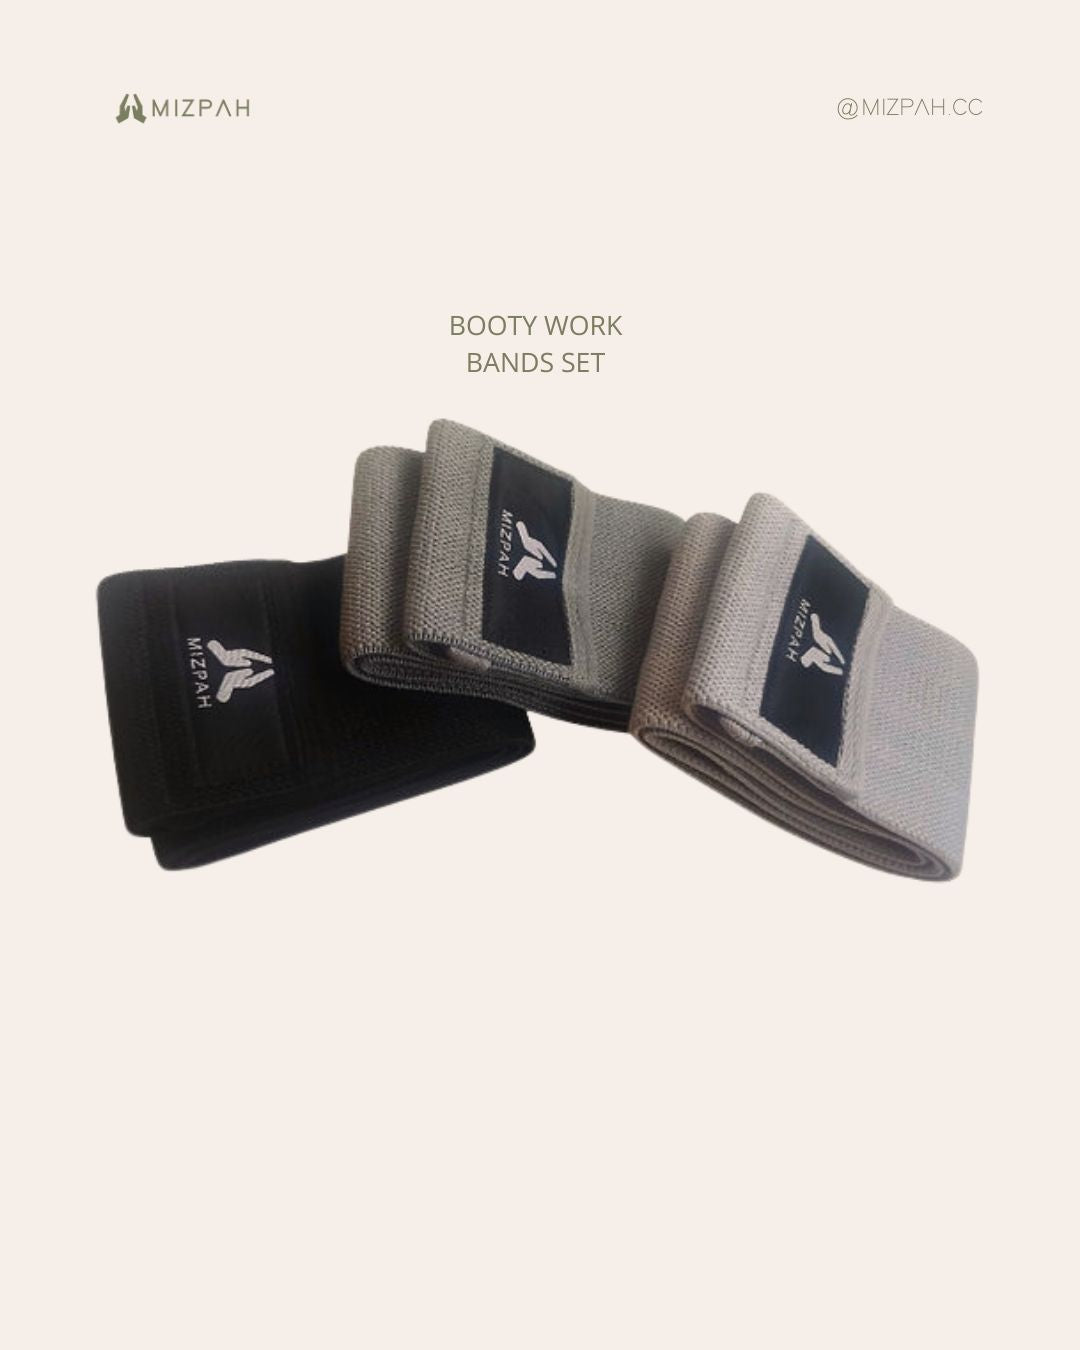 This 3-piece set comes with sturdy booty bands to assist you in your lower-body workouts and a variety of other resistance exercises.